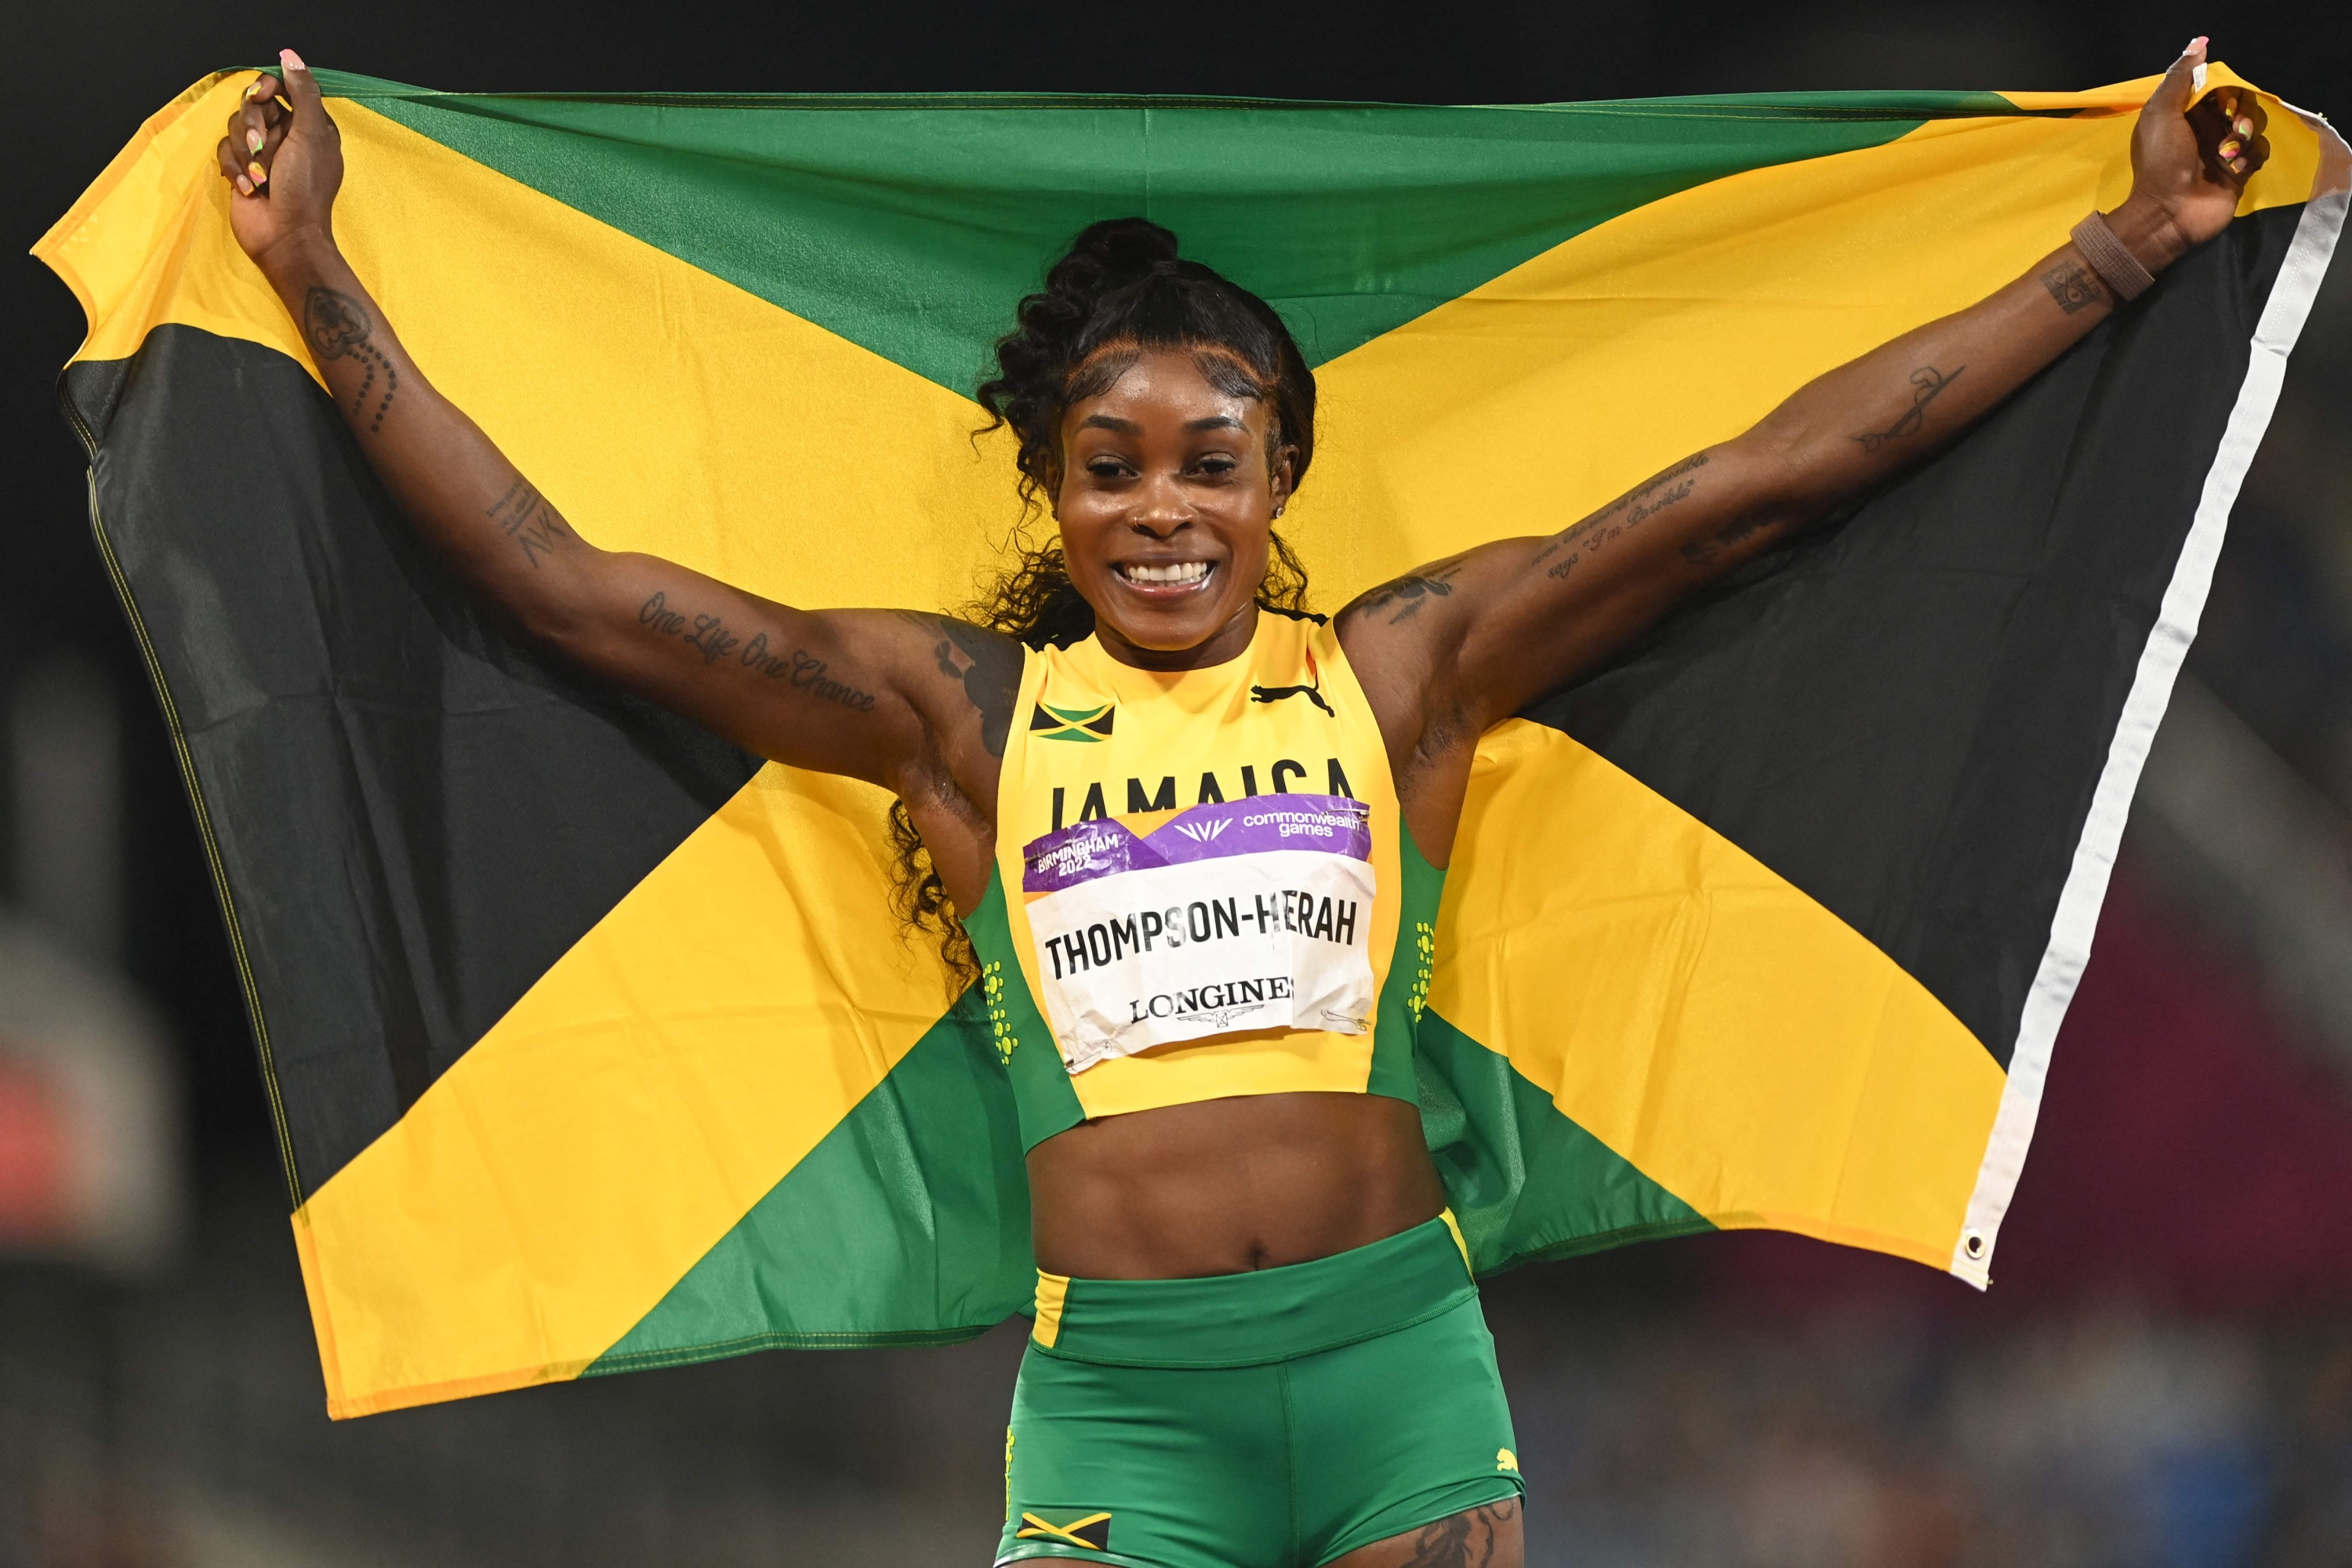 (FILES) Jamaica's Elaine Thompson-Herah celebrates winning and taking the gold medal, and set a new Commonwealth record in the women's 200m final athletics event at the Alexander Stadium, on day nine of the Commonwealth Games in Birmingham, central England, on August 6, 2022. Hard blow for the Jamaican sprint one month before the Paris Olympic Games. Double Olympic 100m and 200m champion Elaine Thompson-Herah will not defend her titles in Paris this summer due to an Achilles tendon injury. (Photo by Glyn KIRK / AFP)